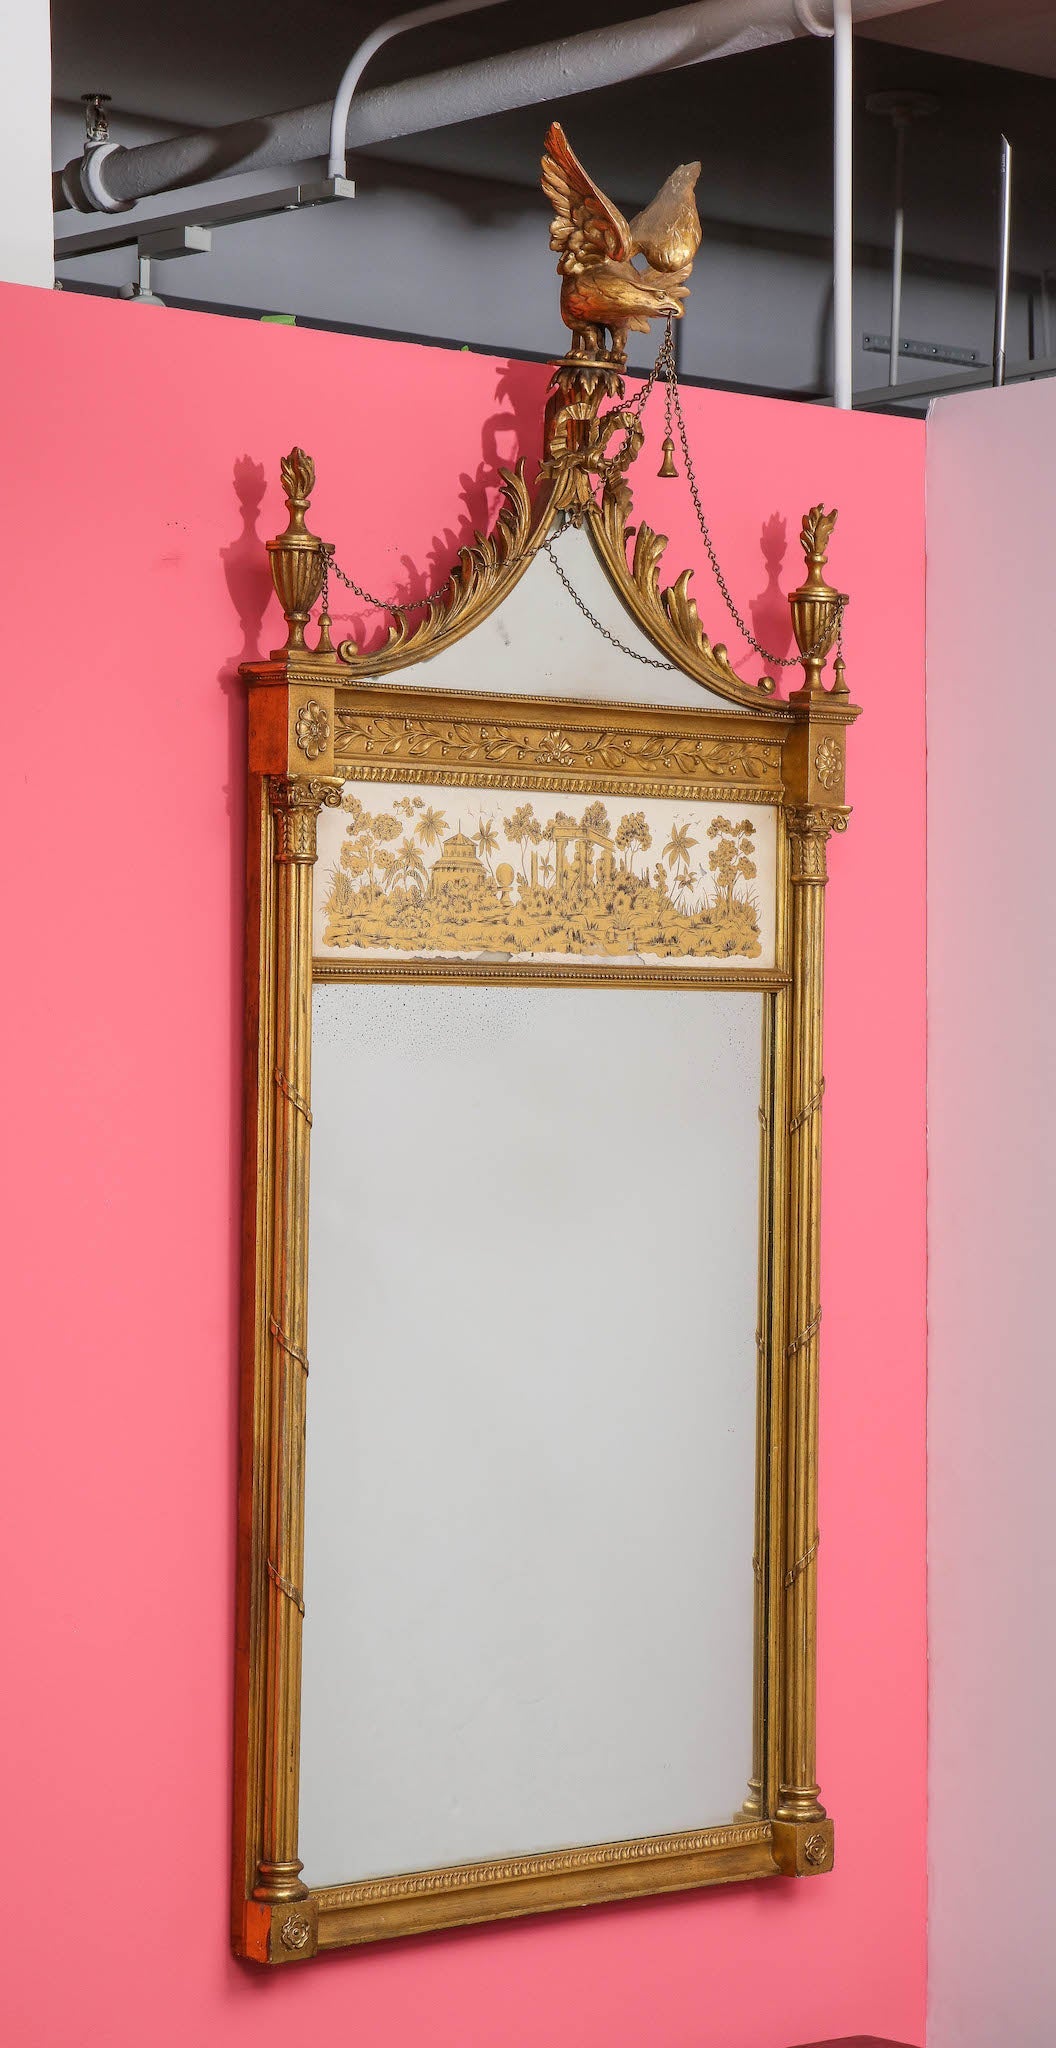 Neoclassical-style-mirror-with-verre-eglomise-panel-2